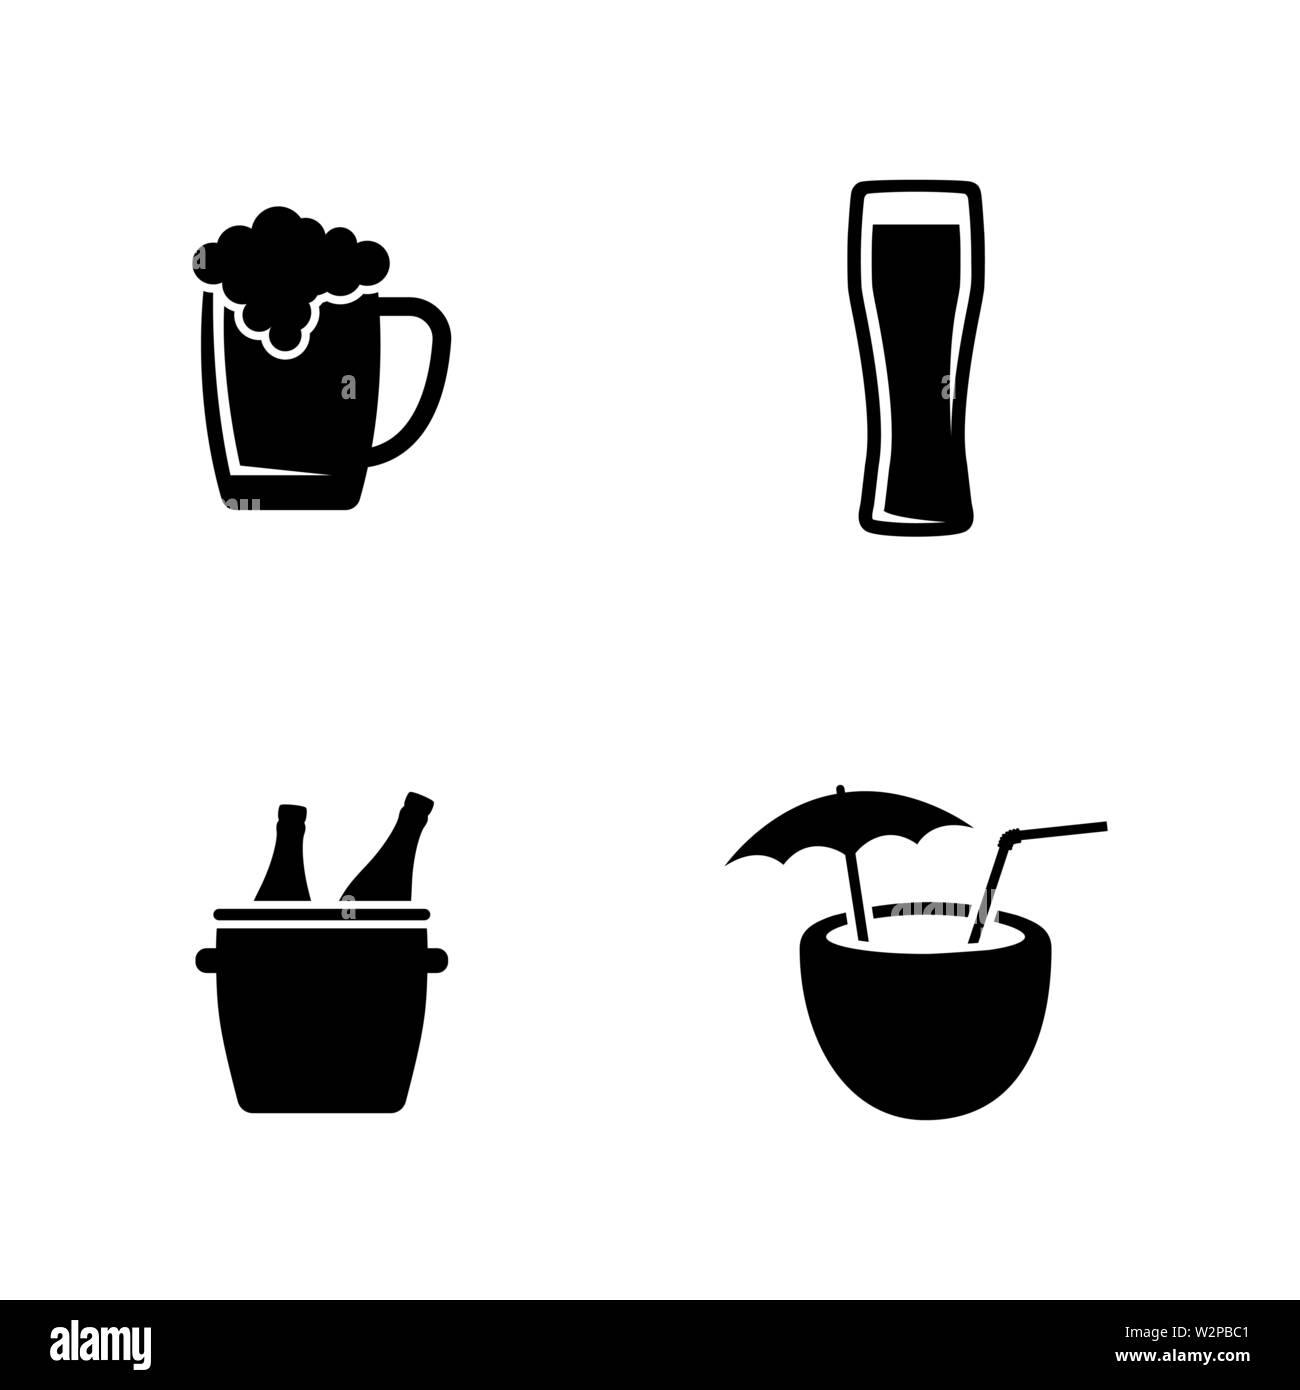 Alcoholic. Simple Related Vector Icons Set for Video, Mobile Apps, Web Sites, Print Projects and Your Design. Black Flat Illustration on White Backgro Stock Vector